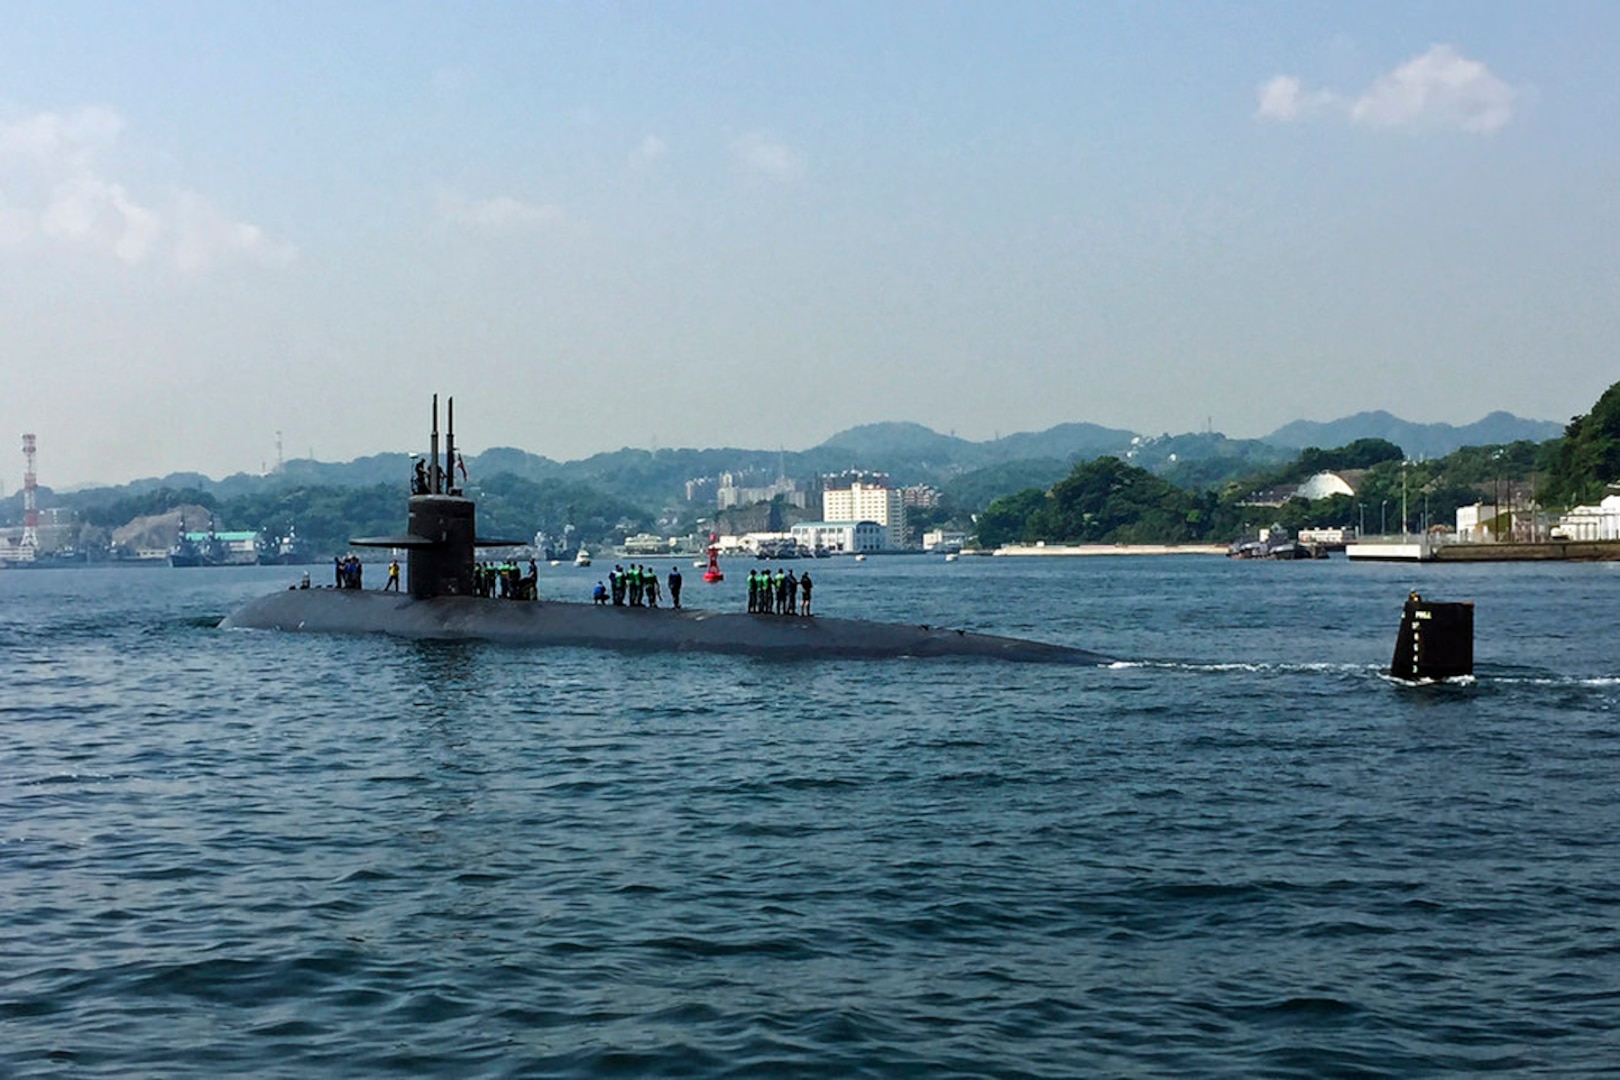 TOKYO BAY (May 8, 2015) - USS Houston (SSN 713) transits Tokyo Bay en route to Fleet Activities Yokosuka for a port visit as part of the Los Angeles-class fast-attack submarine's Western Pacific deployment. Houston is capable of supporting a multitude of missions, including anti-submarine warfare, anti-surface ship warfare, naval special warfare involving special operations forces, intelligence, surveillance and reconnaissance, irregular warfare and mine warfare. 